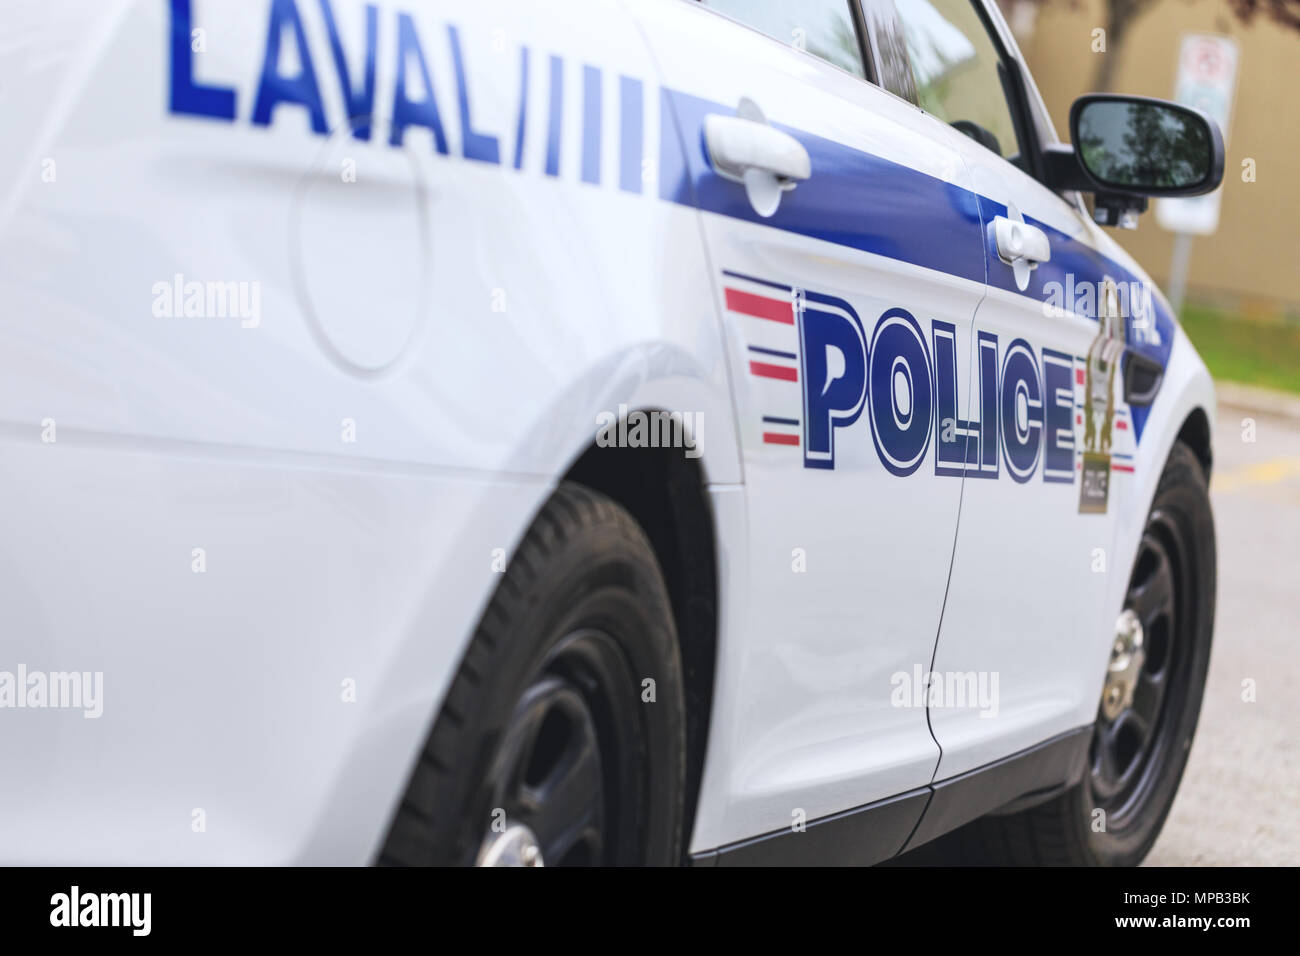 Laval, Canada: May 19, 2018. A real police car of the municipal police department in Laval town, during intervention. Inscriptions on the car. Stock Photo